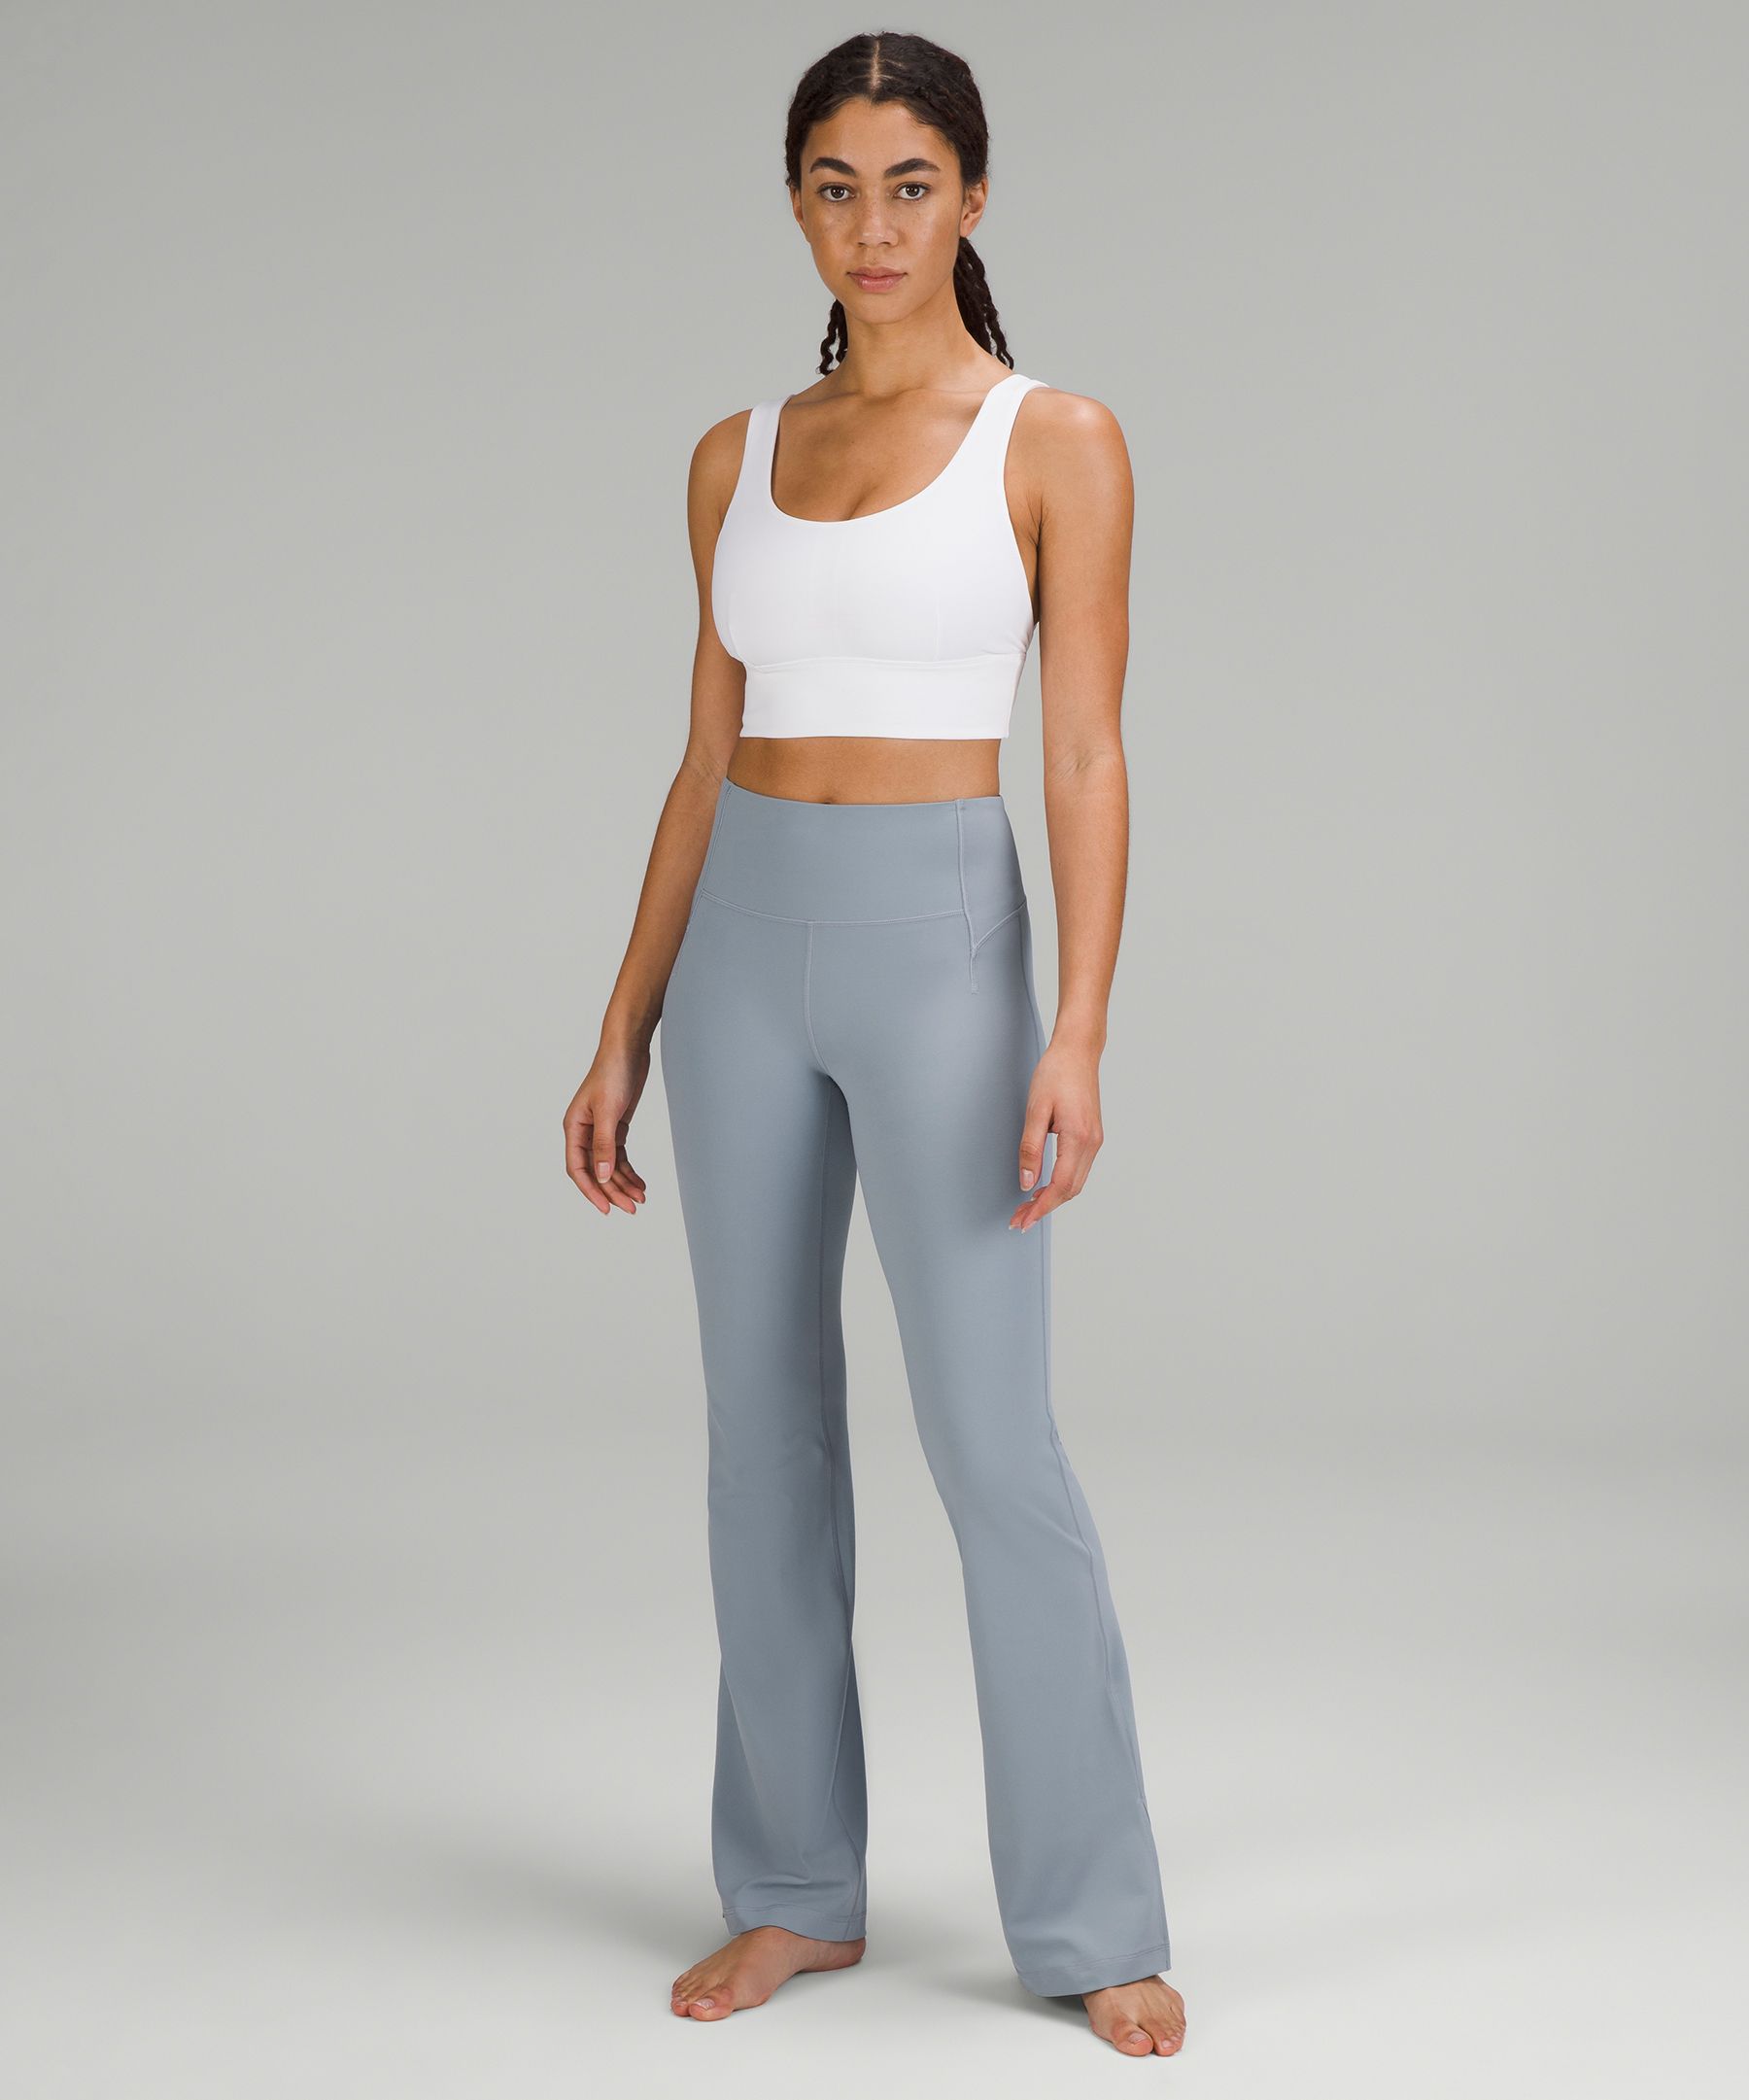 Yoga Softstreme Split Hem Workout Leggings With Pockets With Drawstring And Elastic  Waist For Women Flared Groove, Perfect For Fitness, Gym And Jogging New  Style From Svelte, $15.89